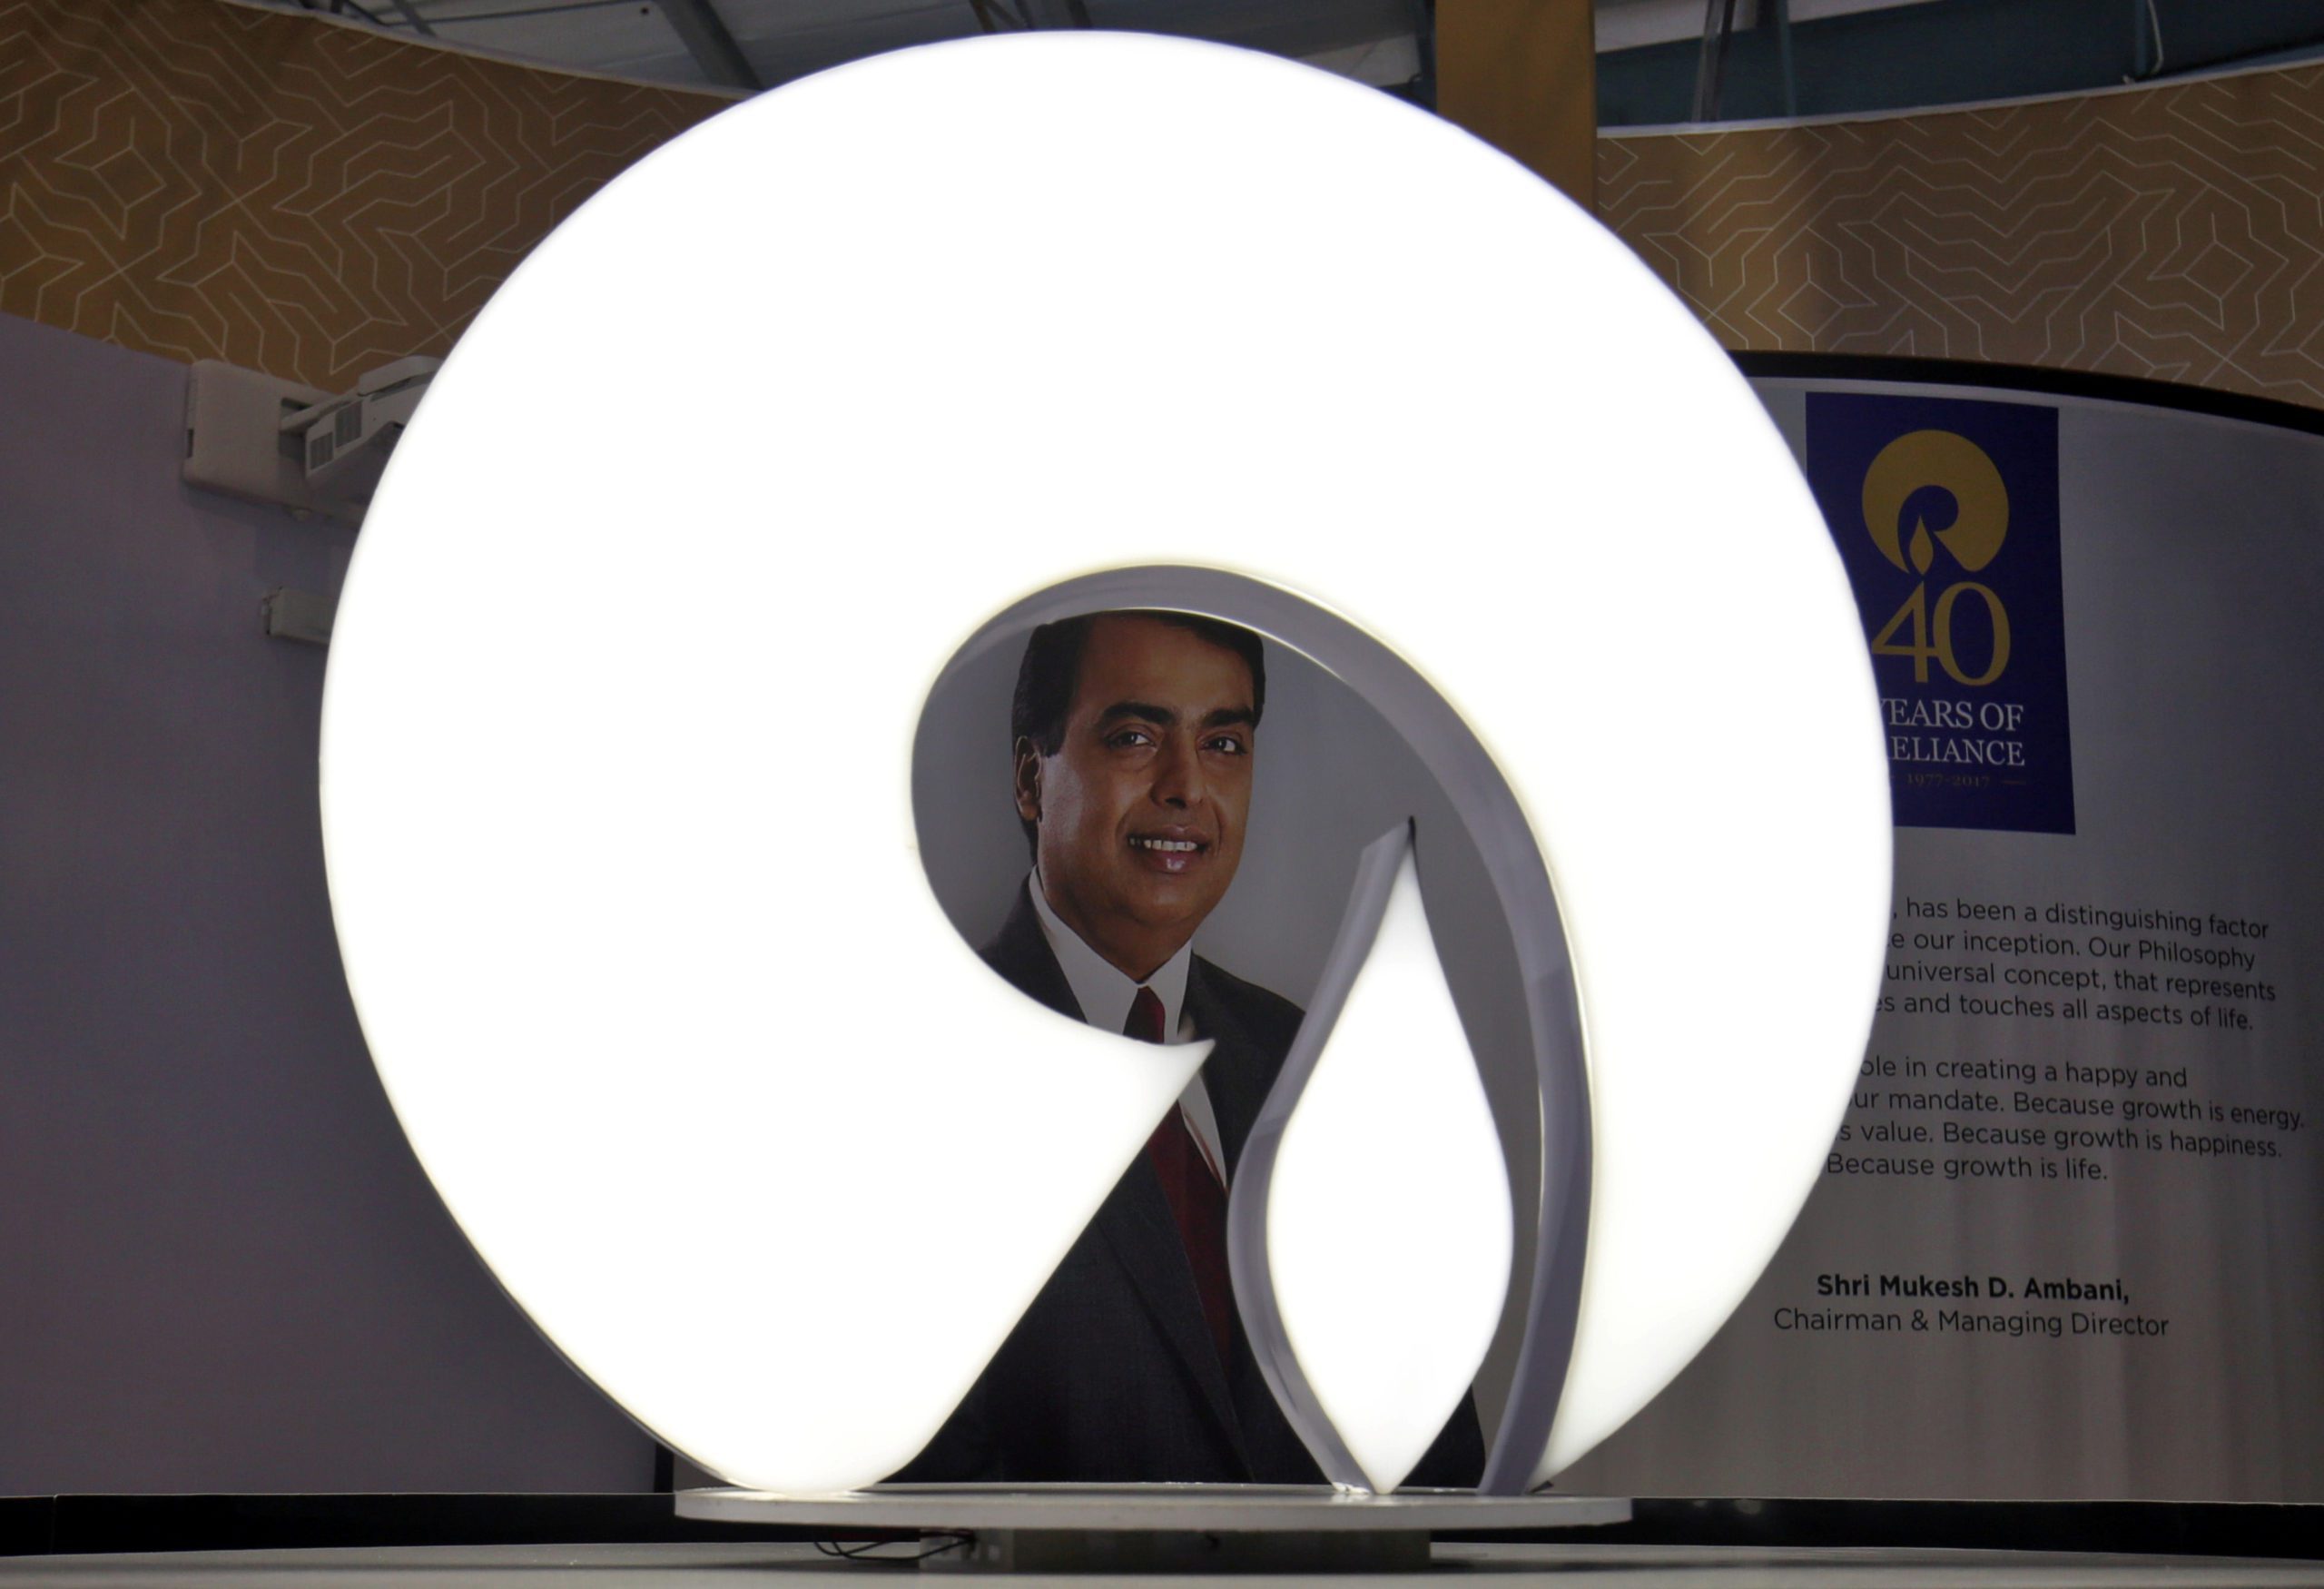 The logo of Reliance Industries is pictured in a stall at the Vibrant Gujarat Global Trade Show at Gandhinagar, India, January 17, 2019. REUTERS/Amit Dave - RC1775A352A0